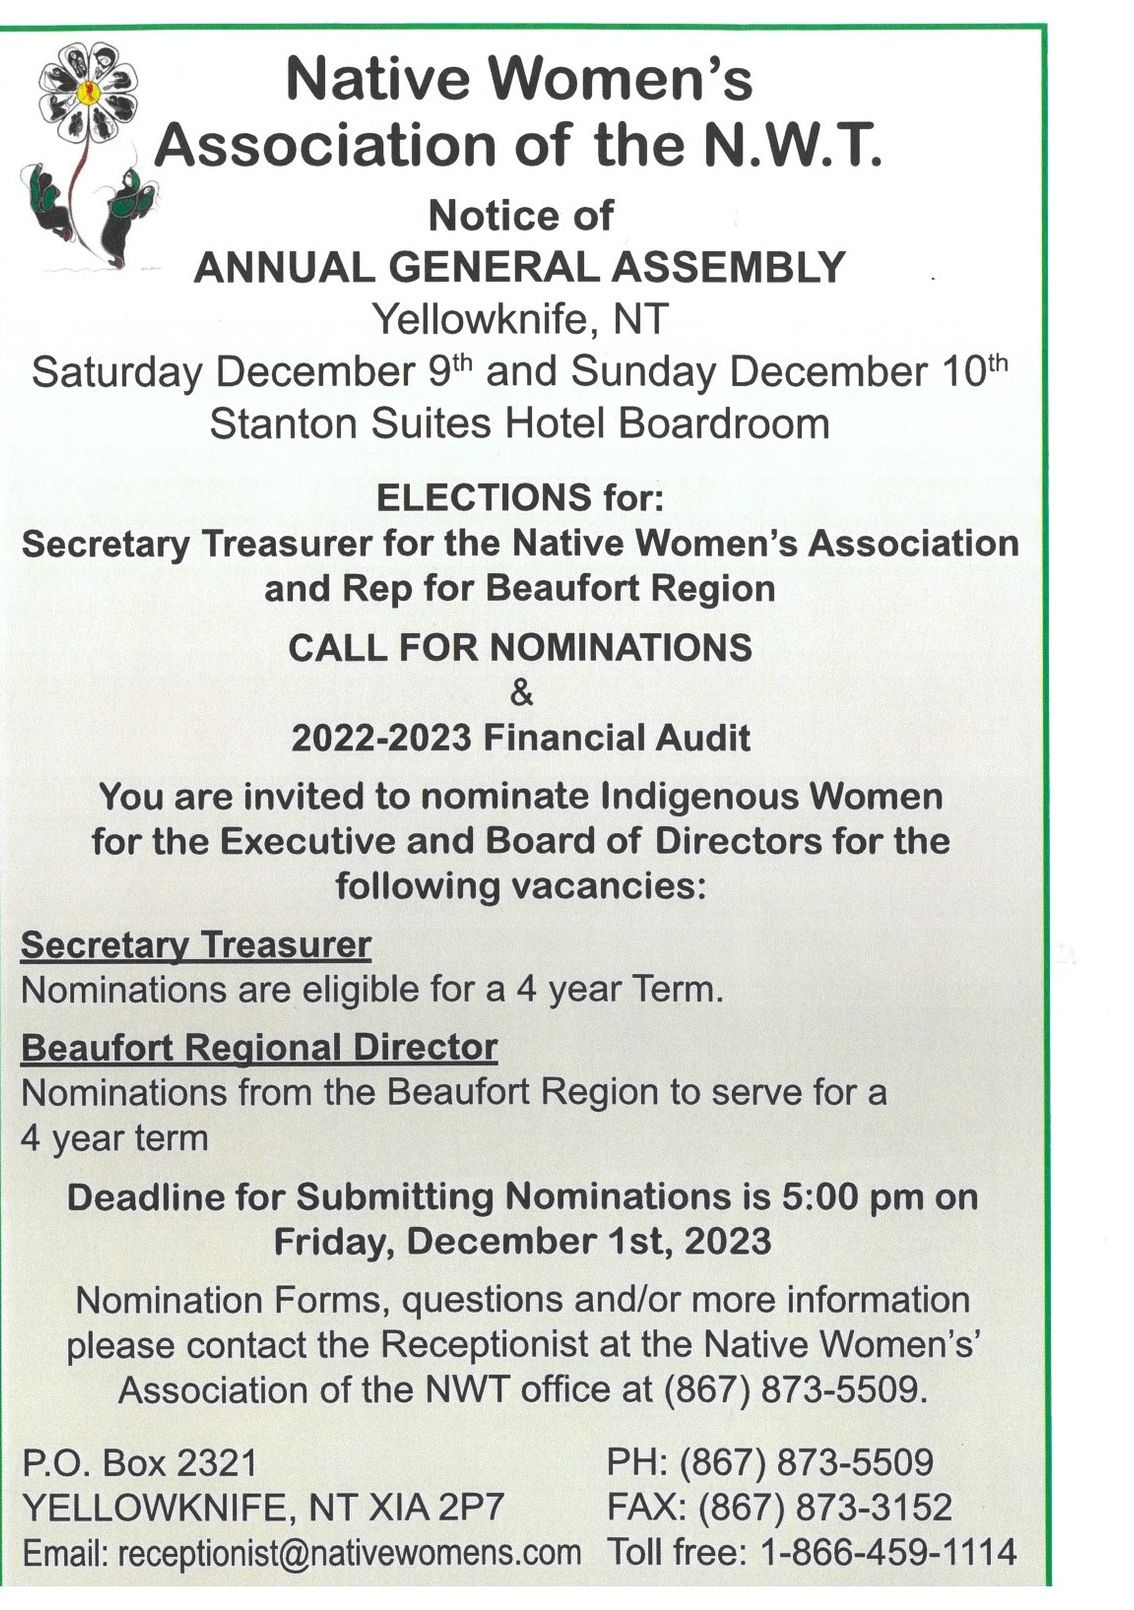 Native Women’s Association Of NWT Notice Of Annual General Assembly 2023